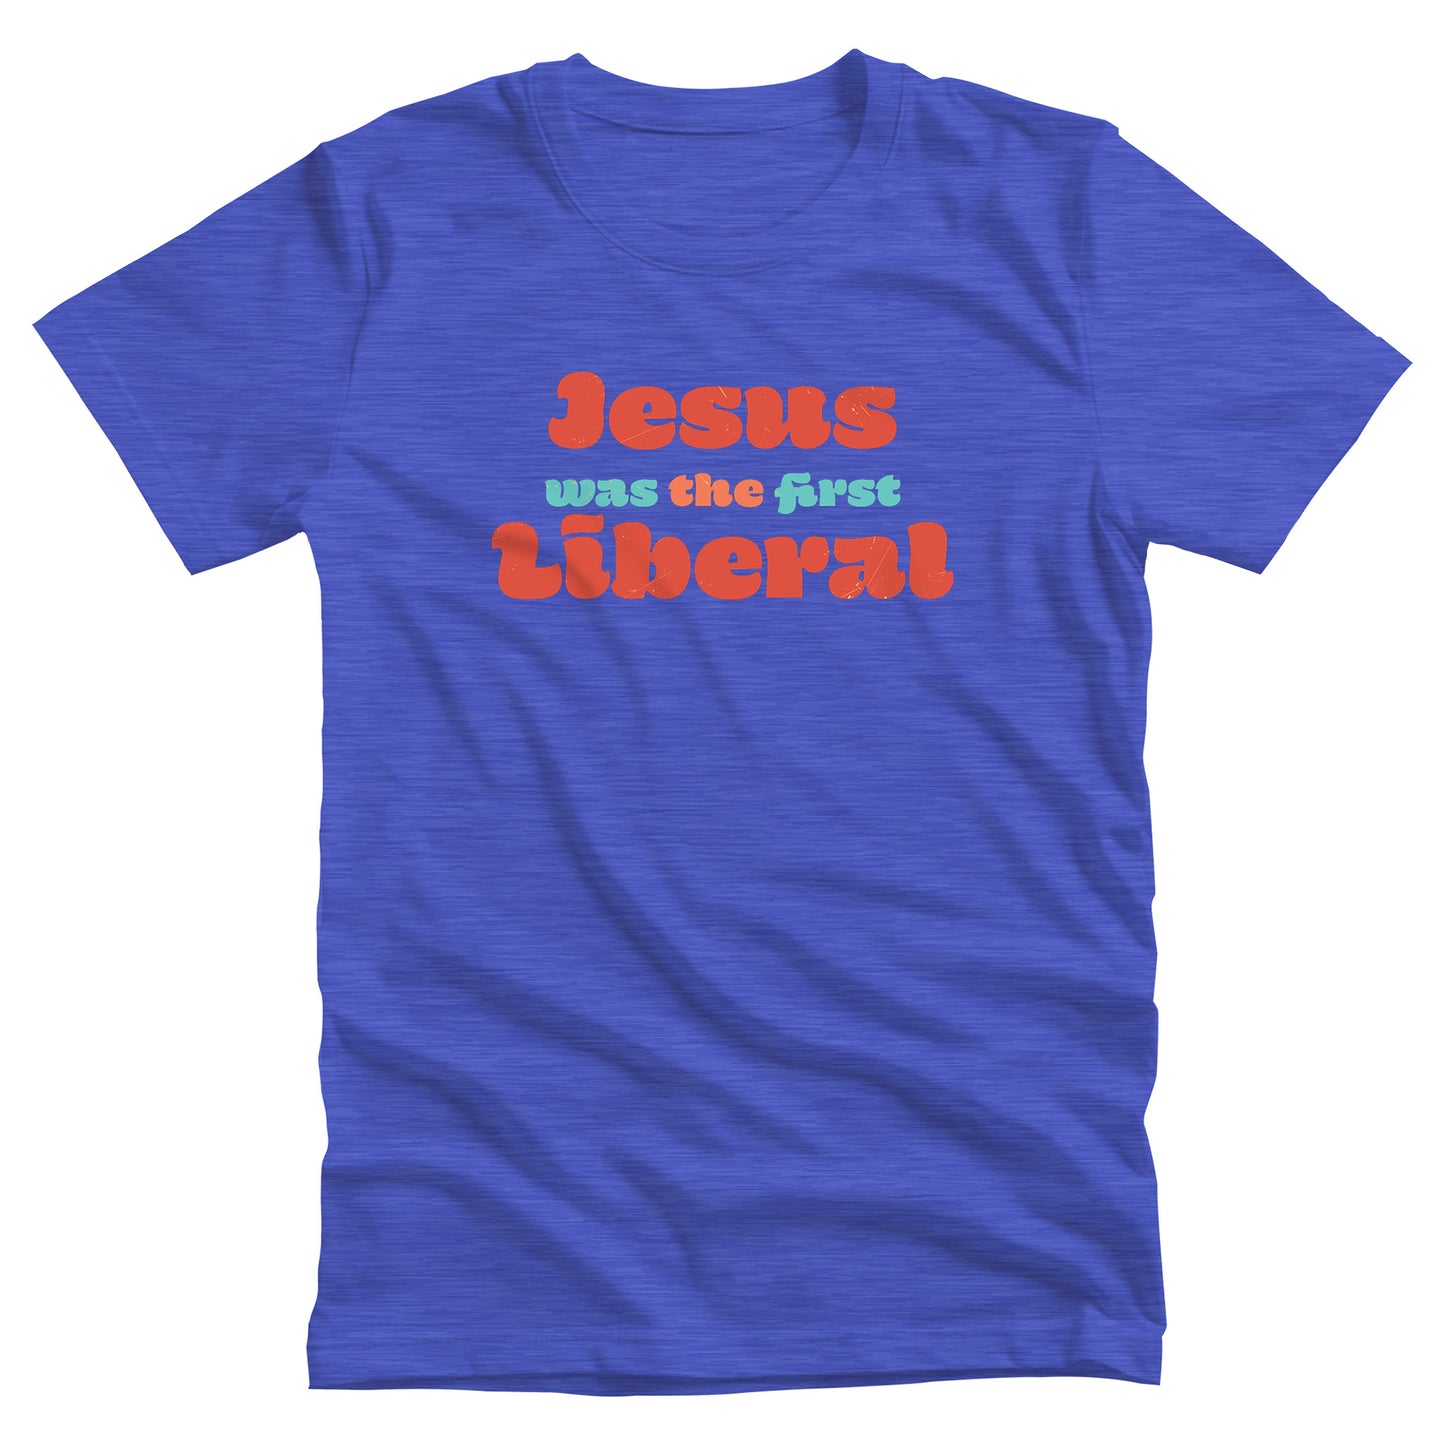 Heather True Royal color unisex t-shirt that says, “Jesus was the first Liberal.” The words “Jesus”, “the”, and “Liberal” are all a shade of orange, and the words “Was” and “First” are a light blue-green.